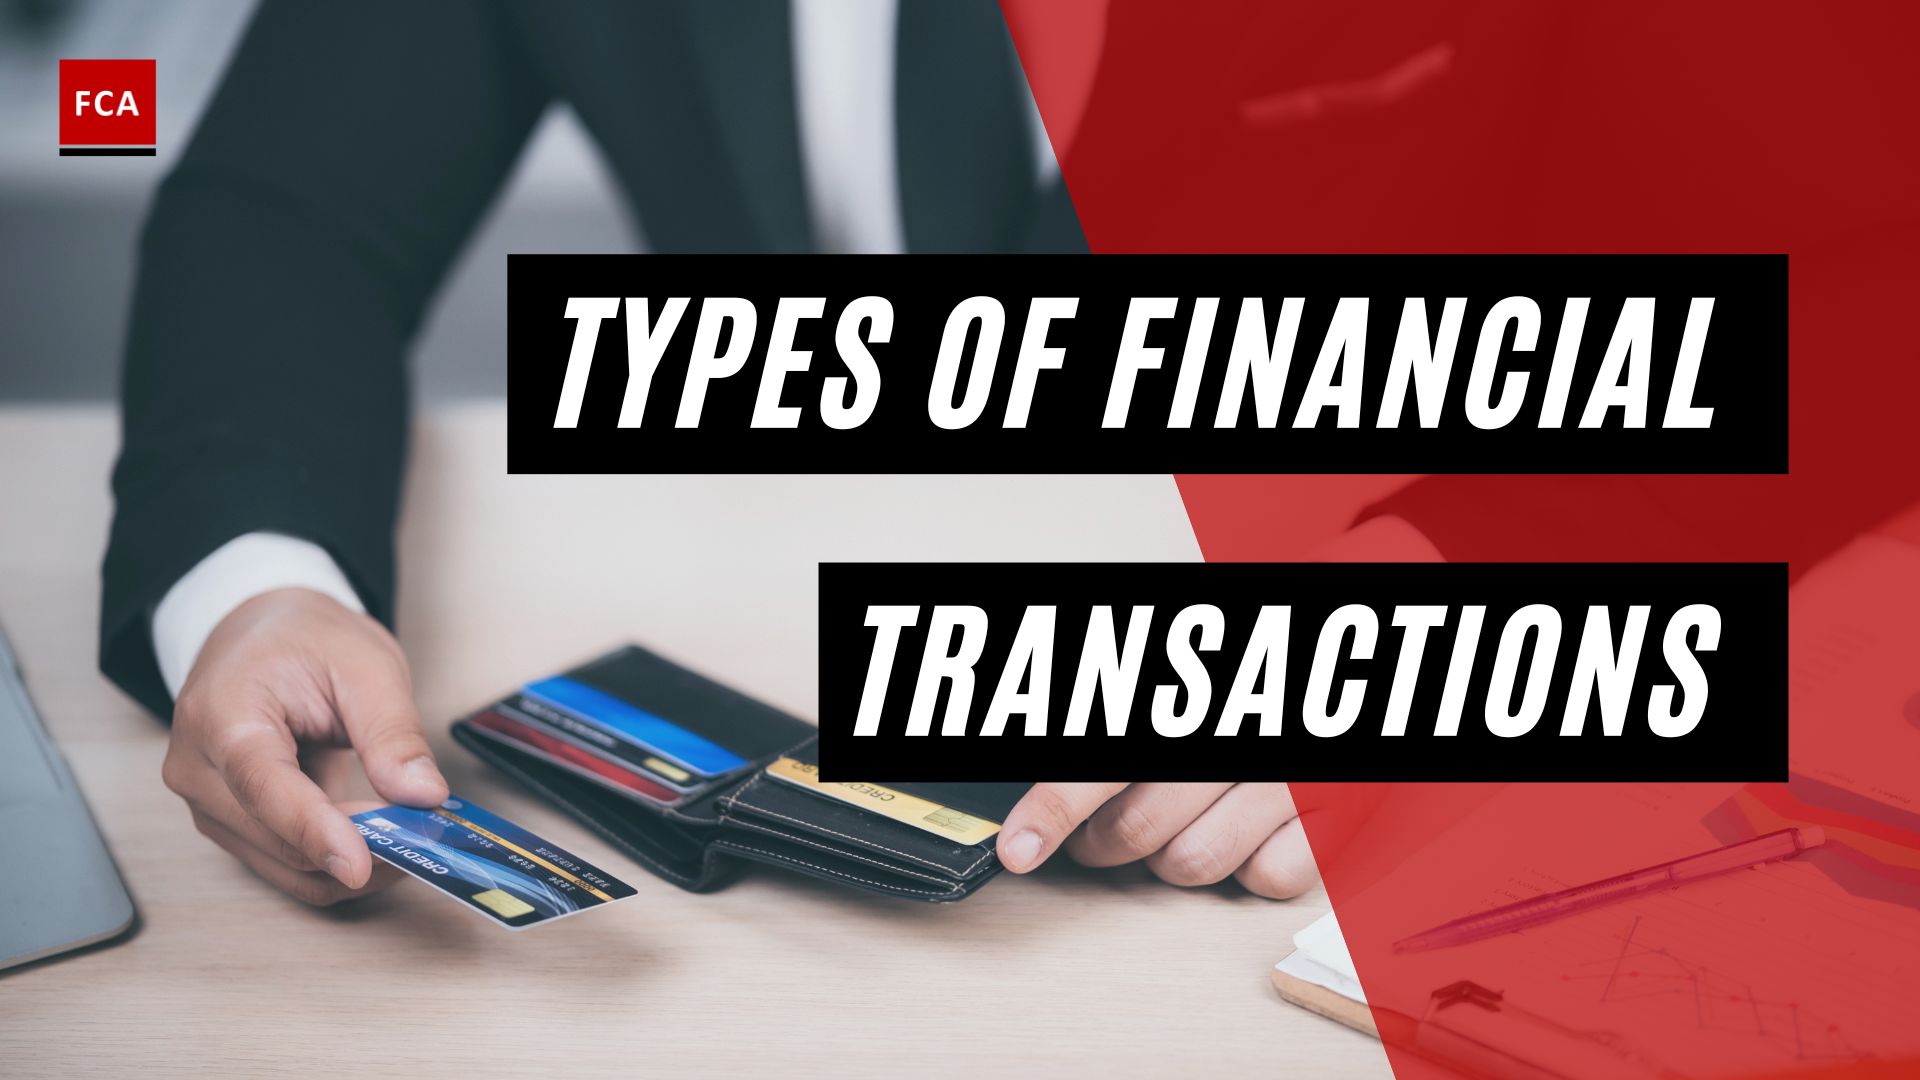 Types of transactions you can do in a bank